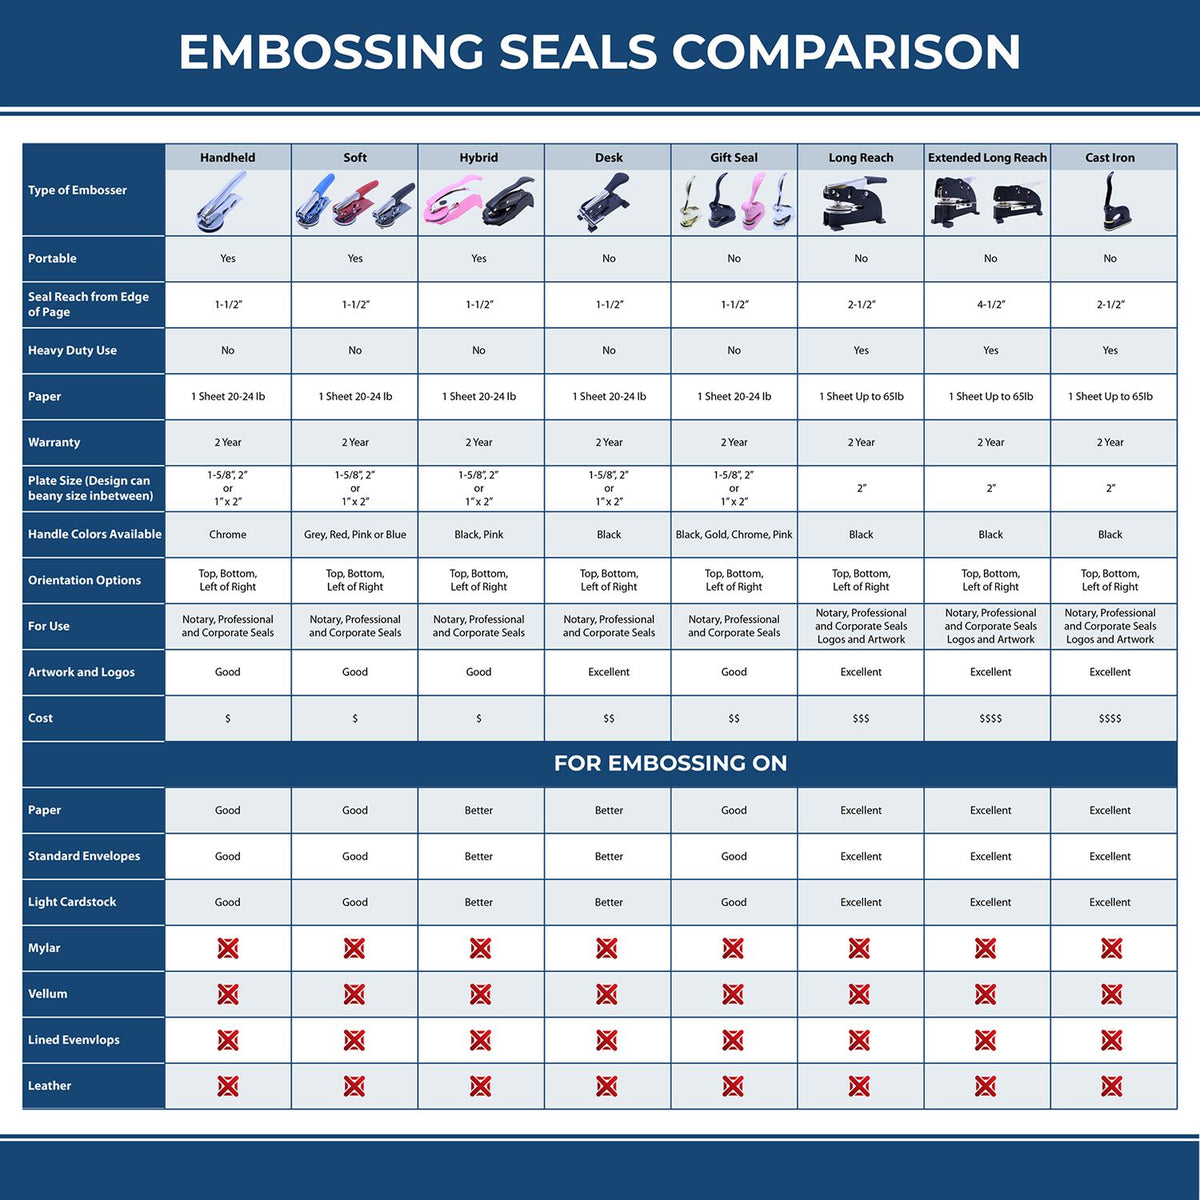 A comparison chart for the different types of mount models available for the Hybrid Illinois Engineer Seal